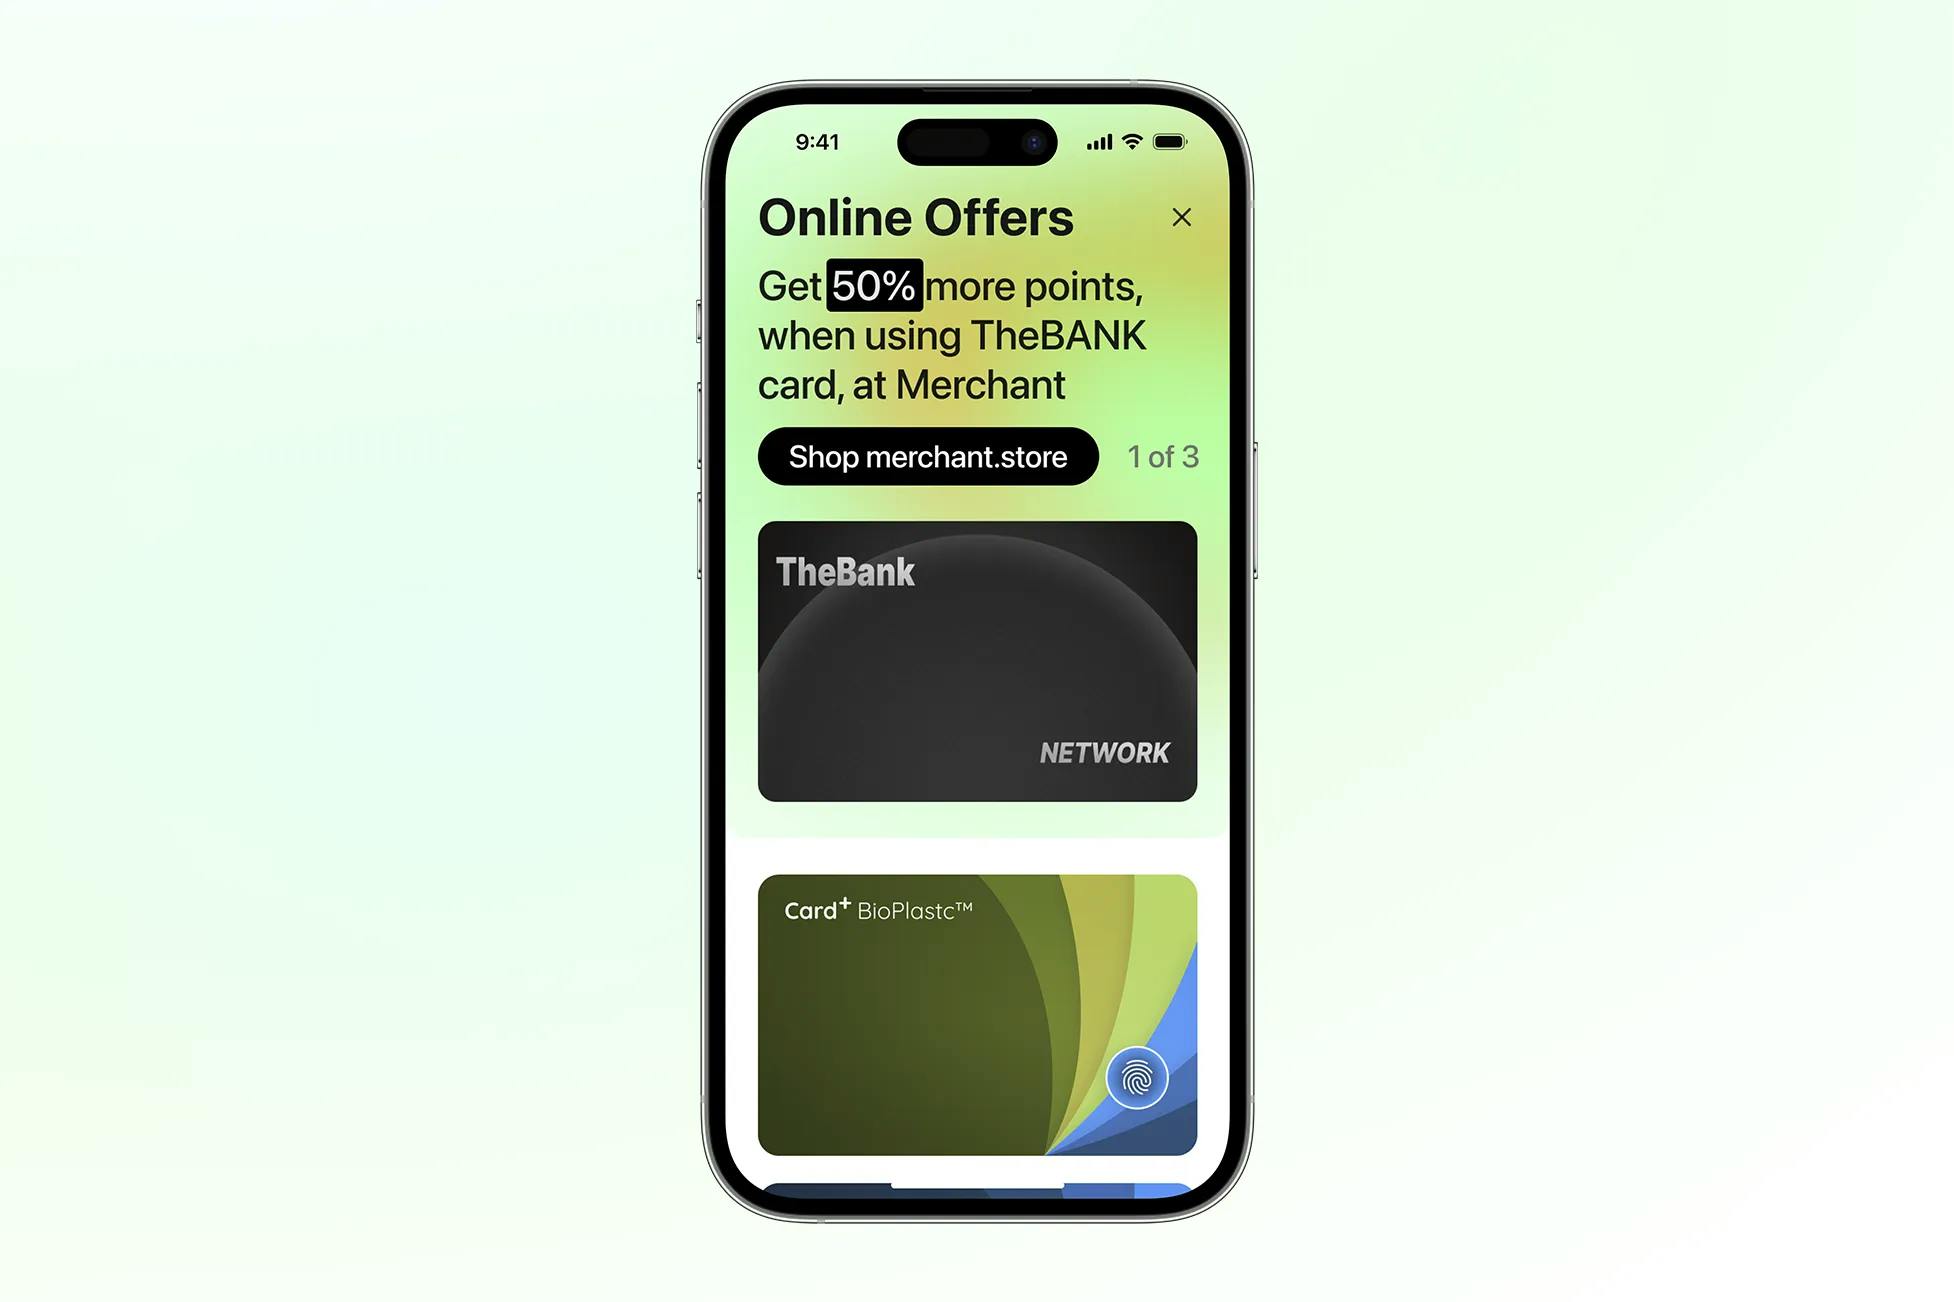 Online discount at a merchant store, via the Card+ App on a SmartPhone